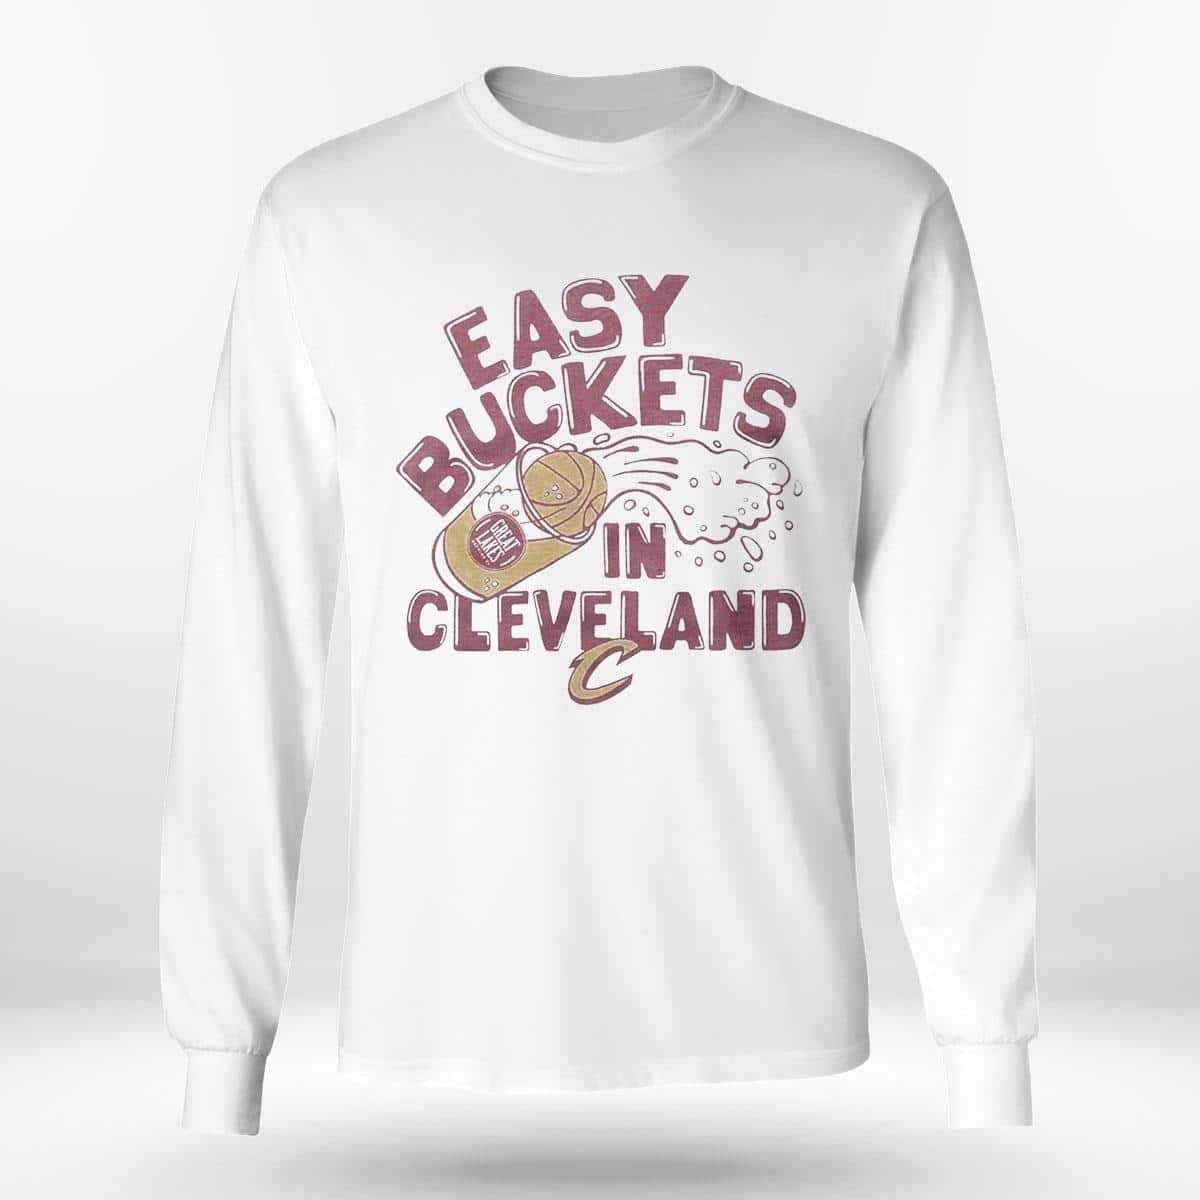 Easy Buckets In Cleveland T-Shirt